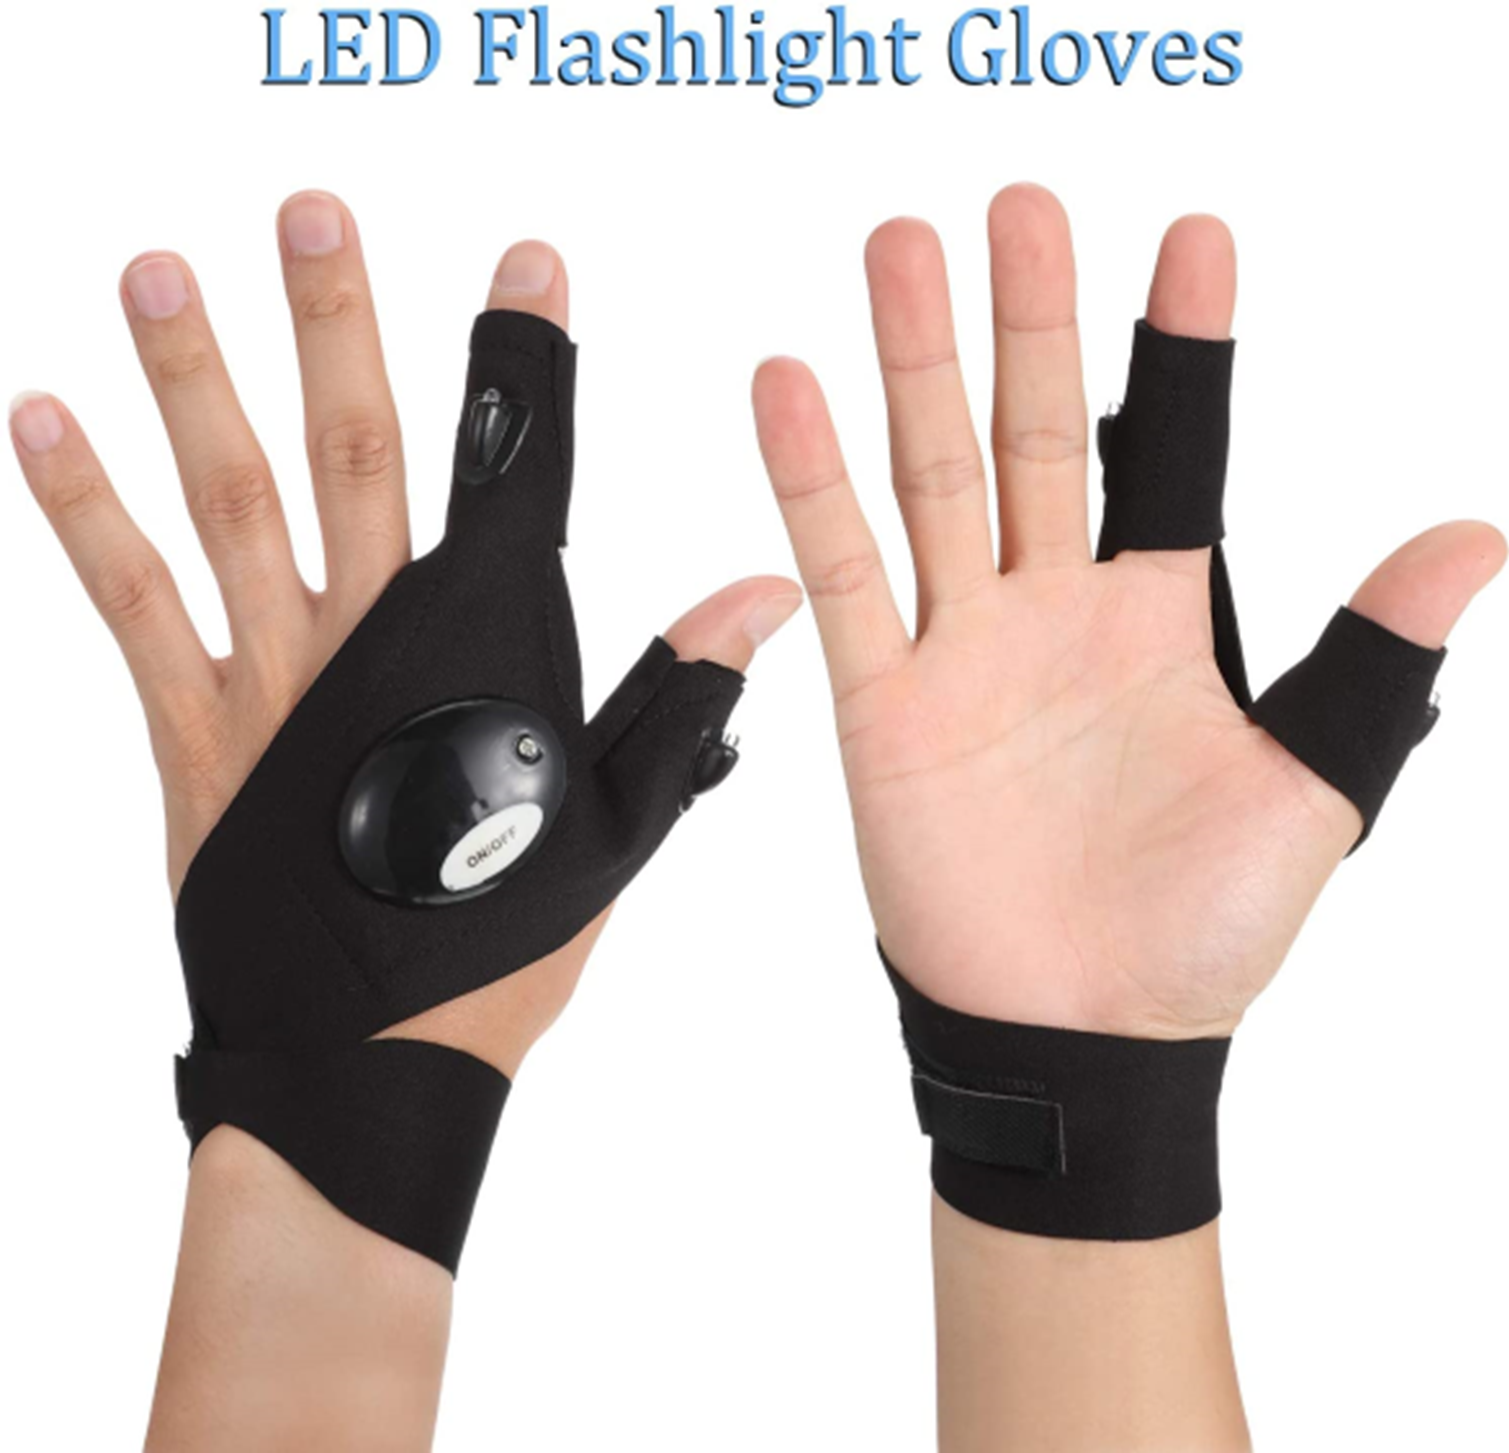 2 LED Flashlight Gloves, Cool Gadgets Gifts for Men Perfect for Handyman, Camping, Fishing, Repair, Gift for Guys - 1 Pair